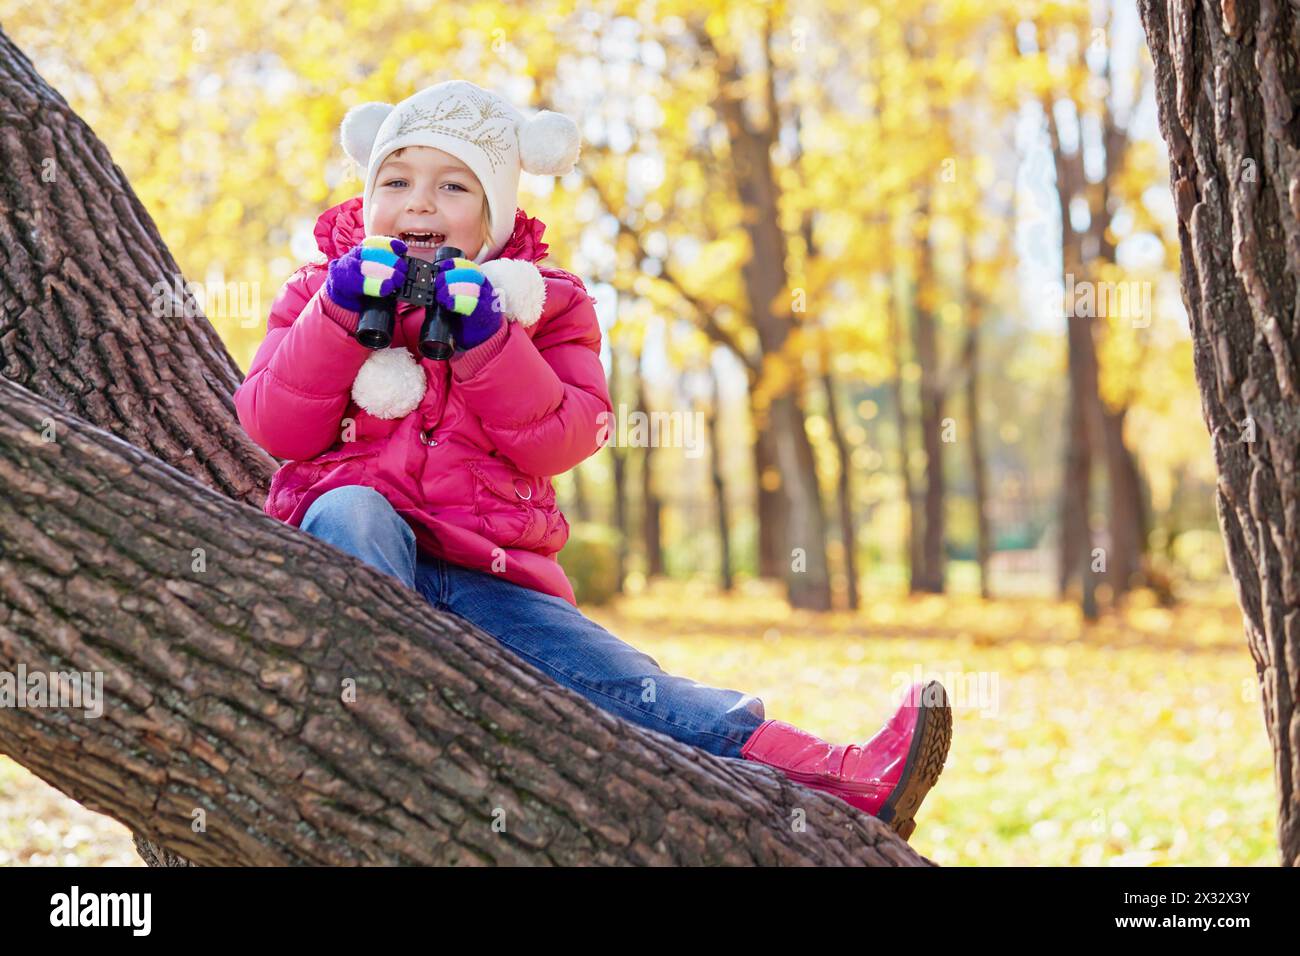 Little girl with binocular sits on inclined tree trunk in autumn park Stock Photo